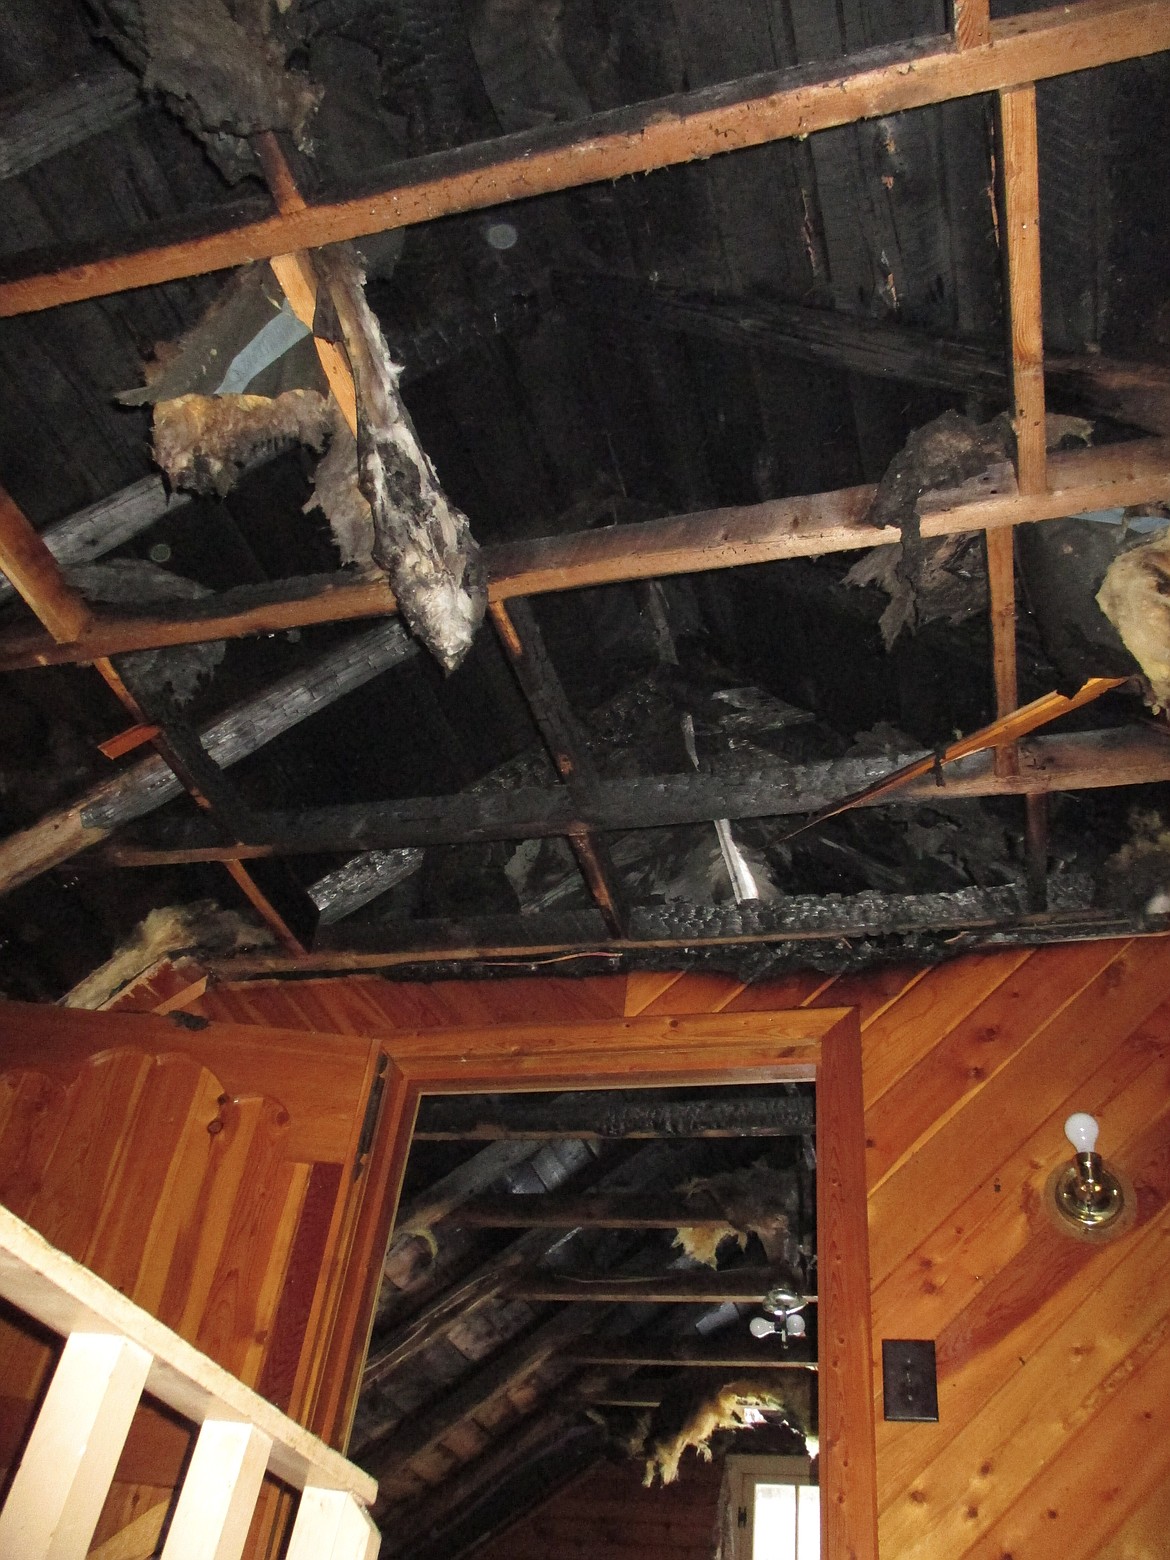 Firefighters from the Upper Yaak VFD removed most of the ceiling in above the second floor as they worked to make sure the fire was completely out. (Photo courtesy Mike Sanders)